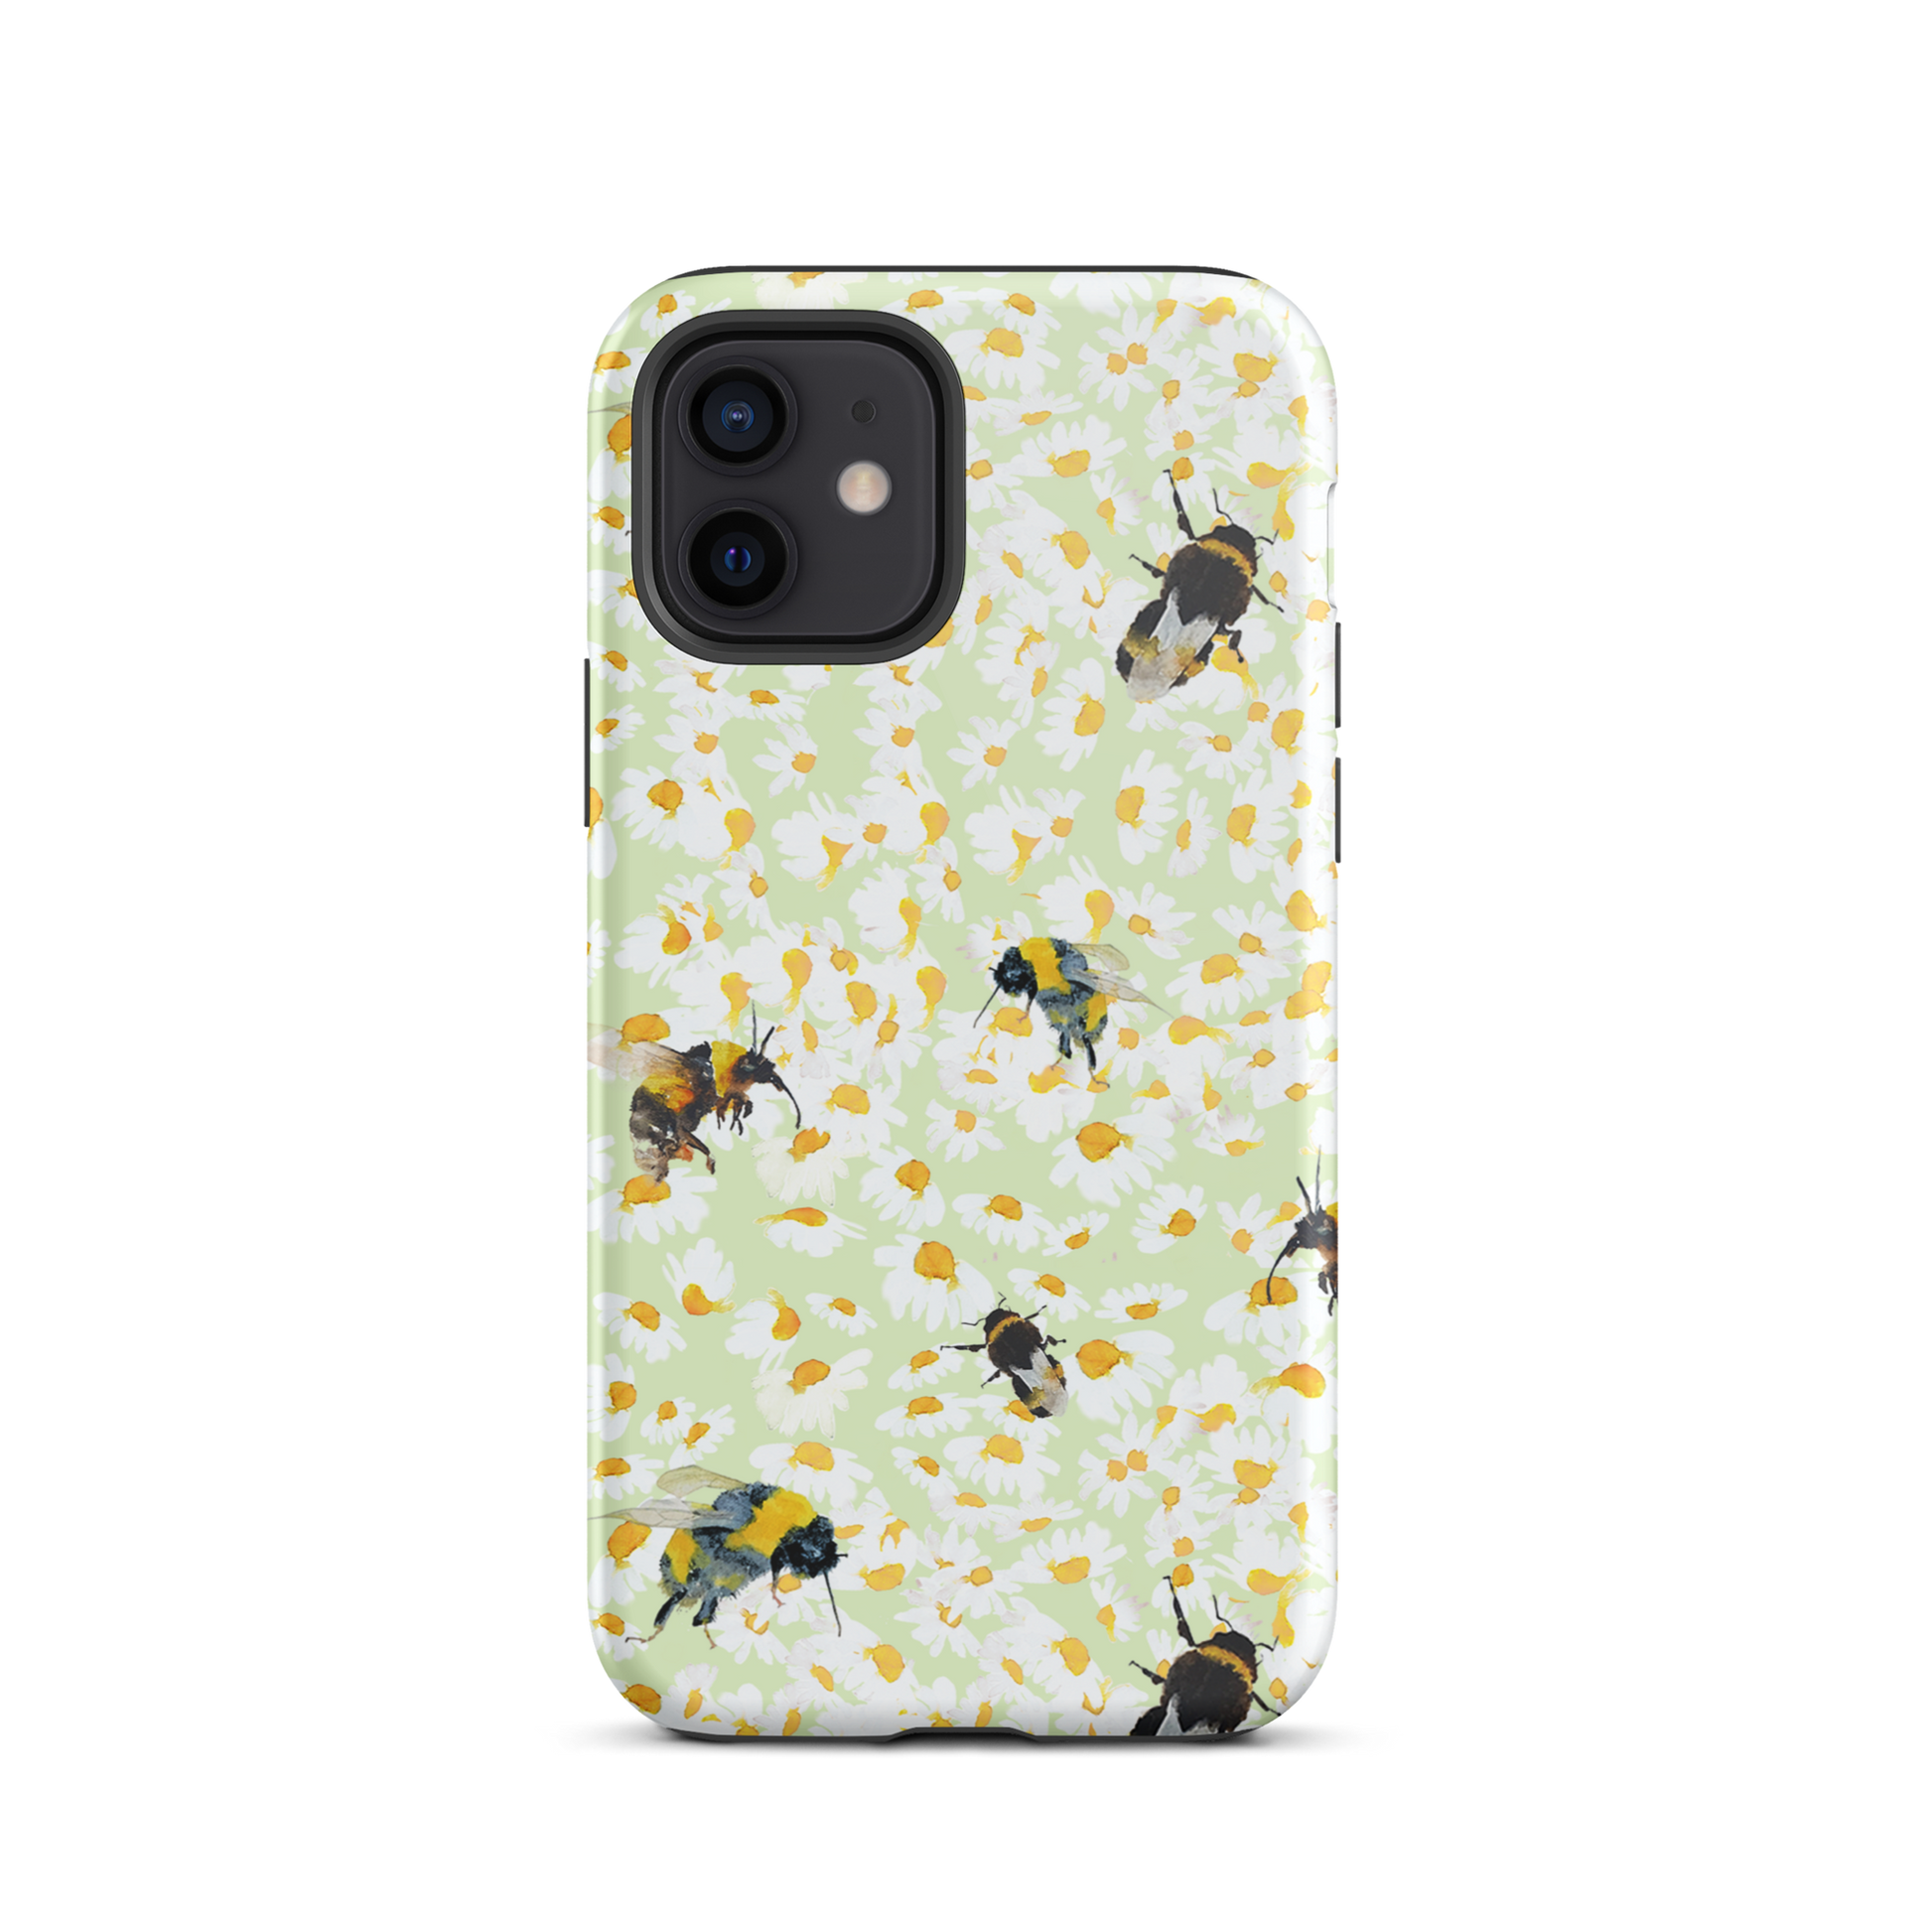 iPhone Case by Annie Grant of Bee and Daisies